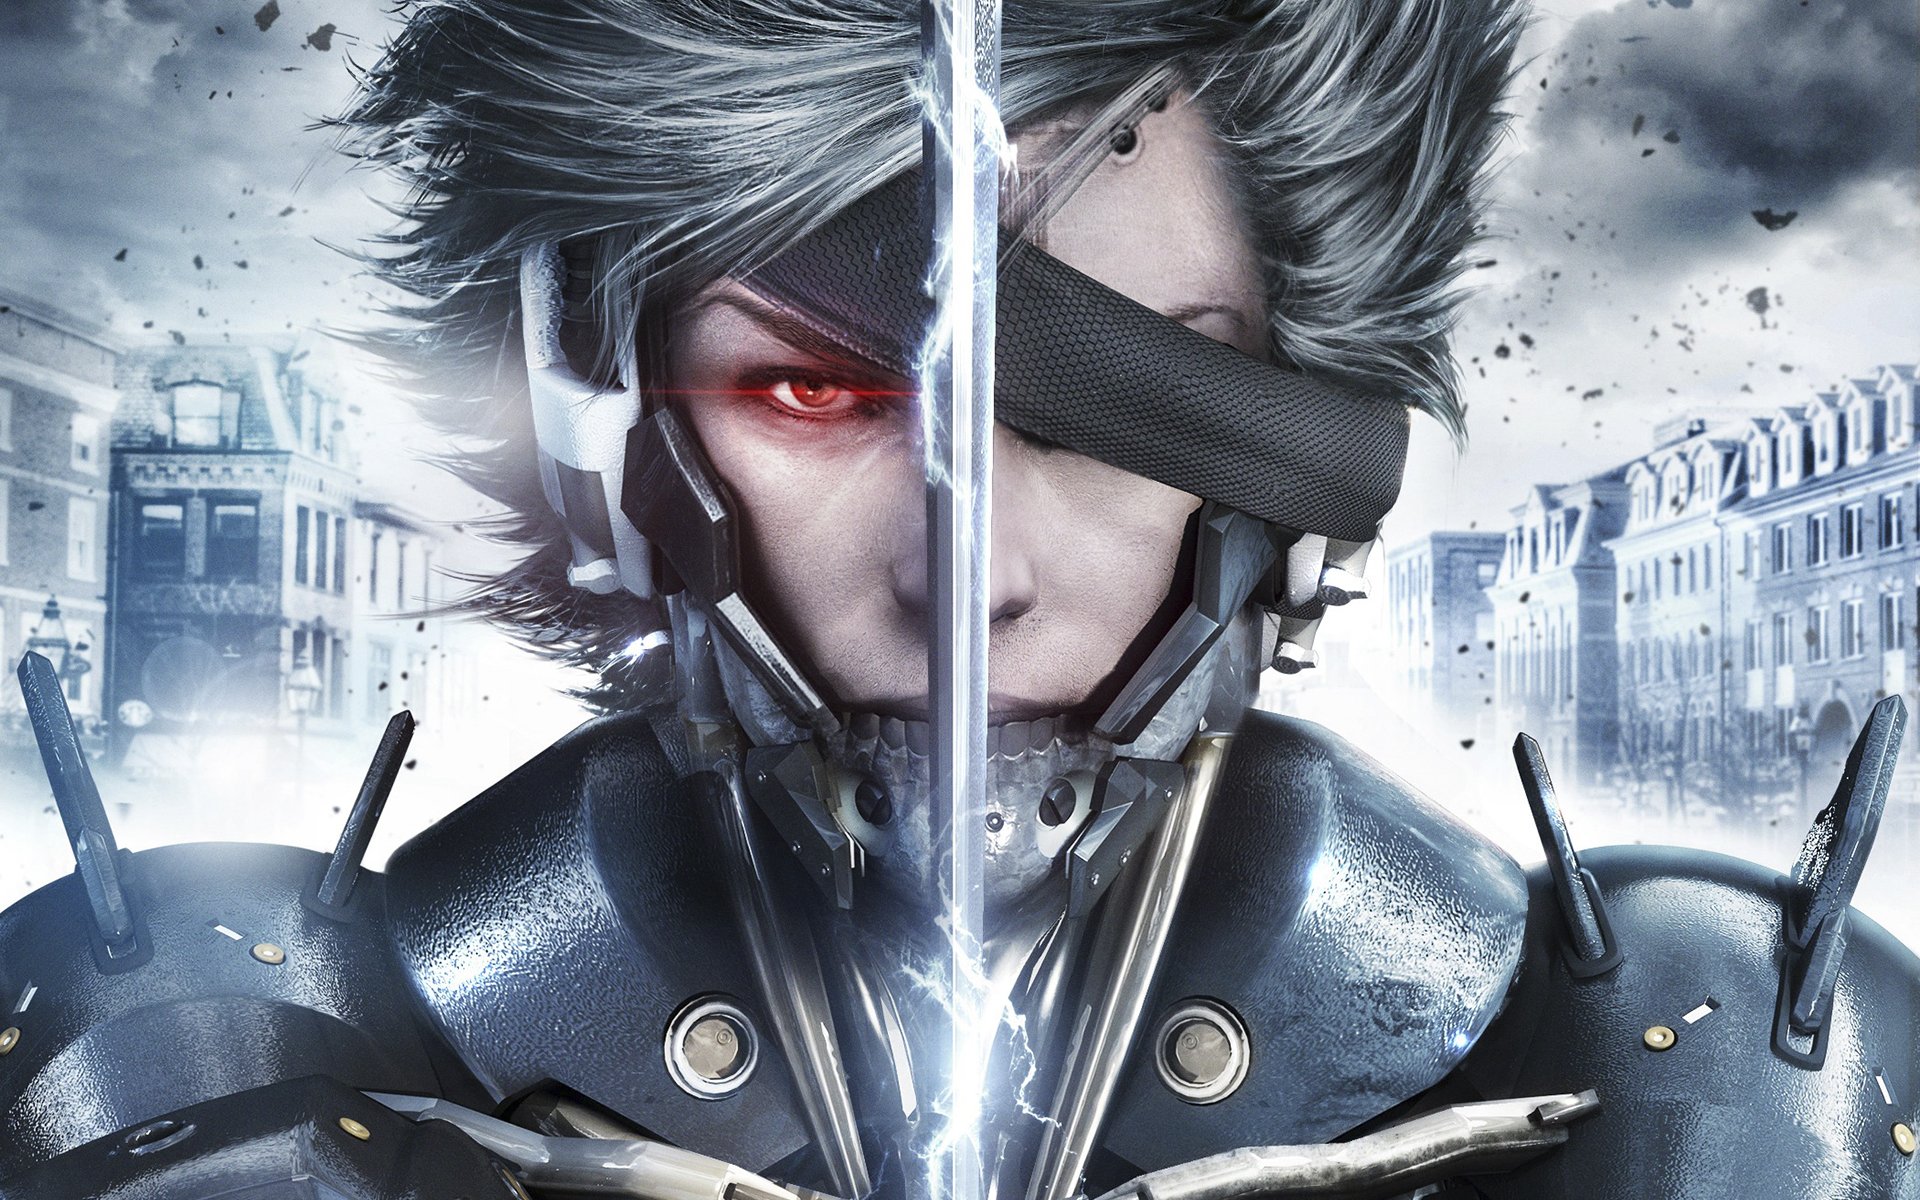 Metal gear rising revengeance pc patch update download